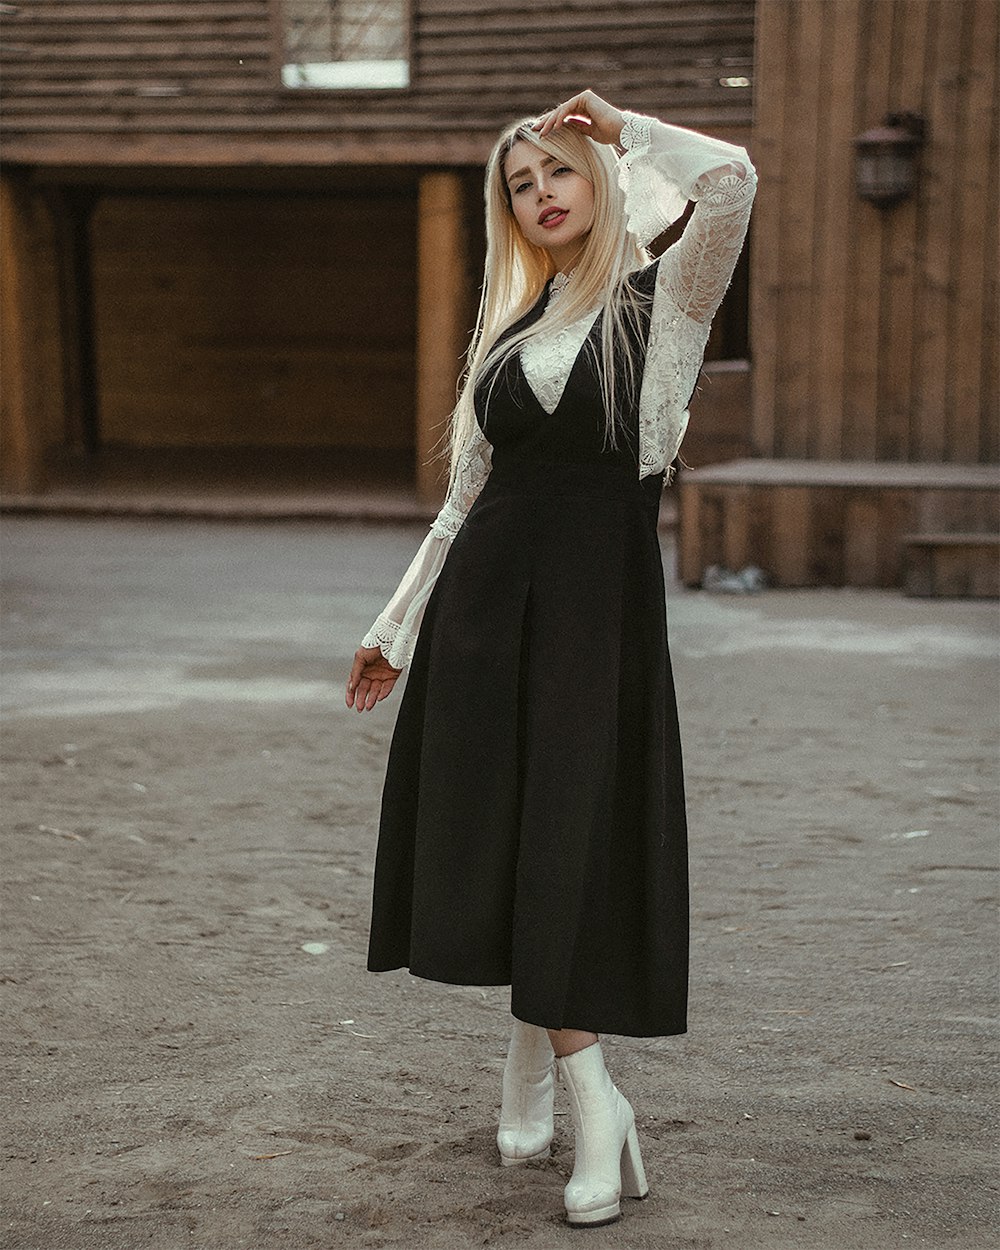 a woman wearing a black dress and white boots